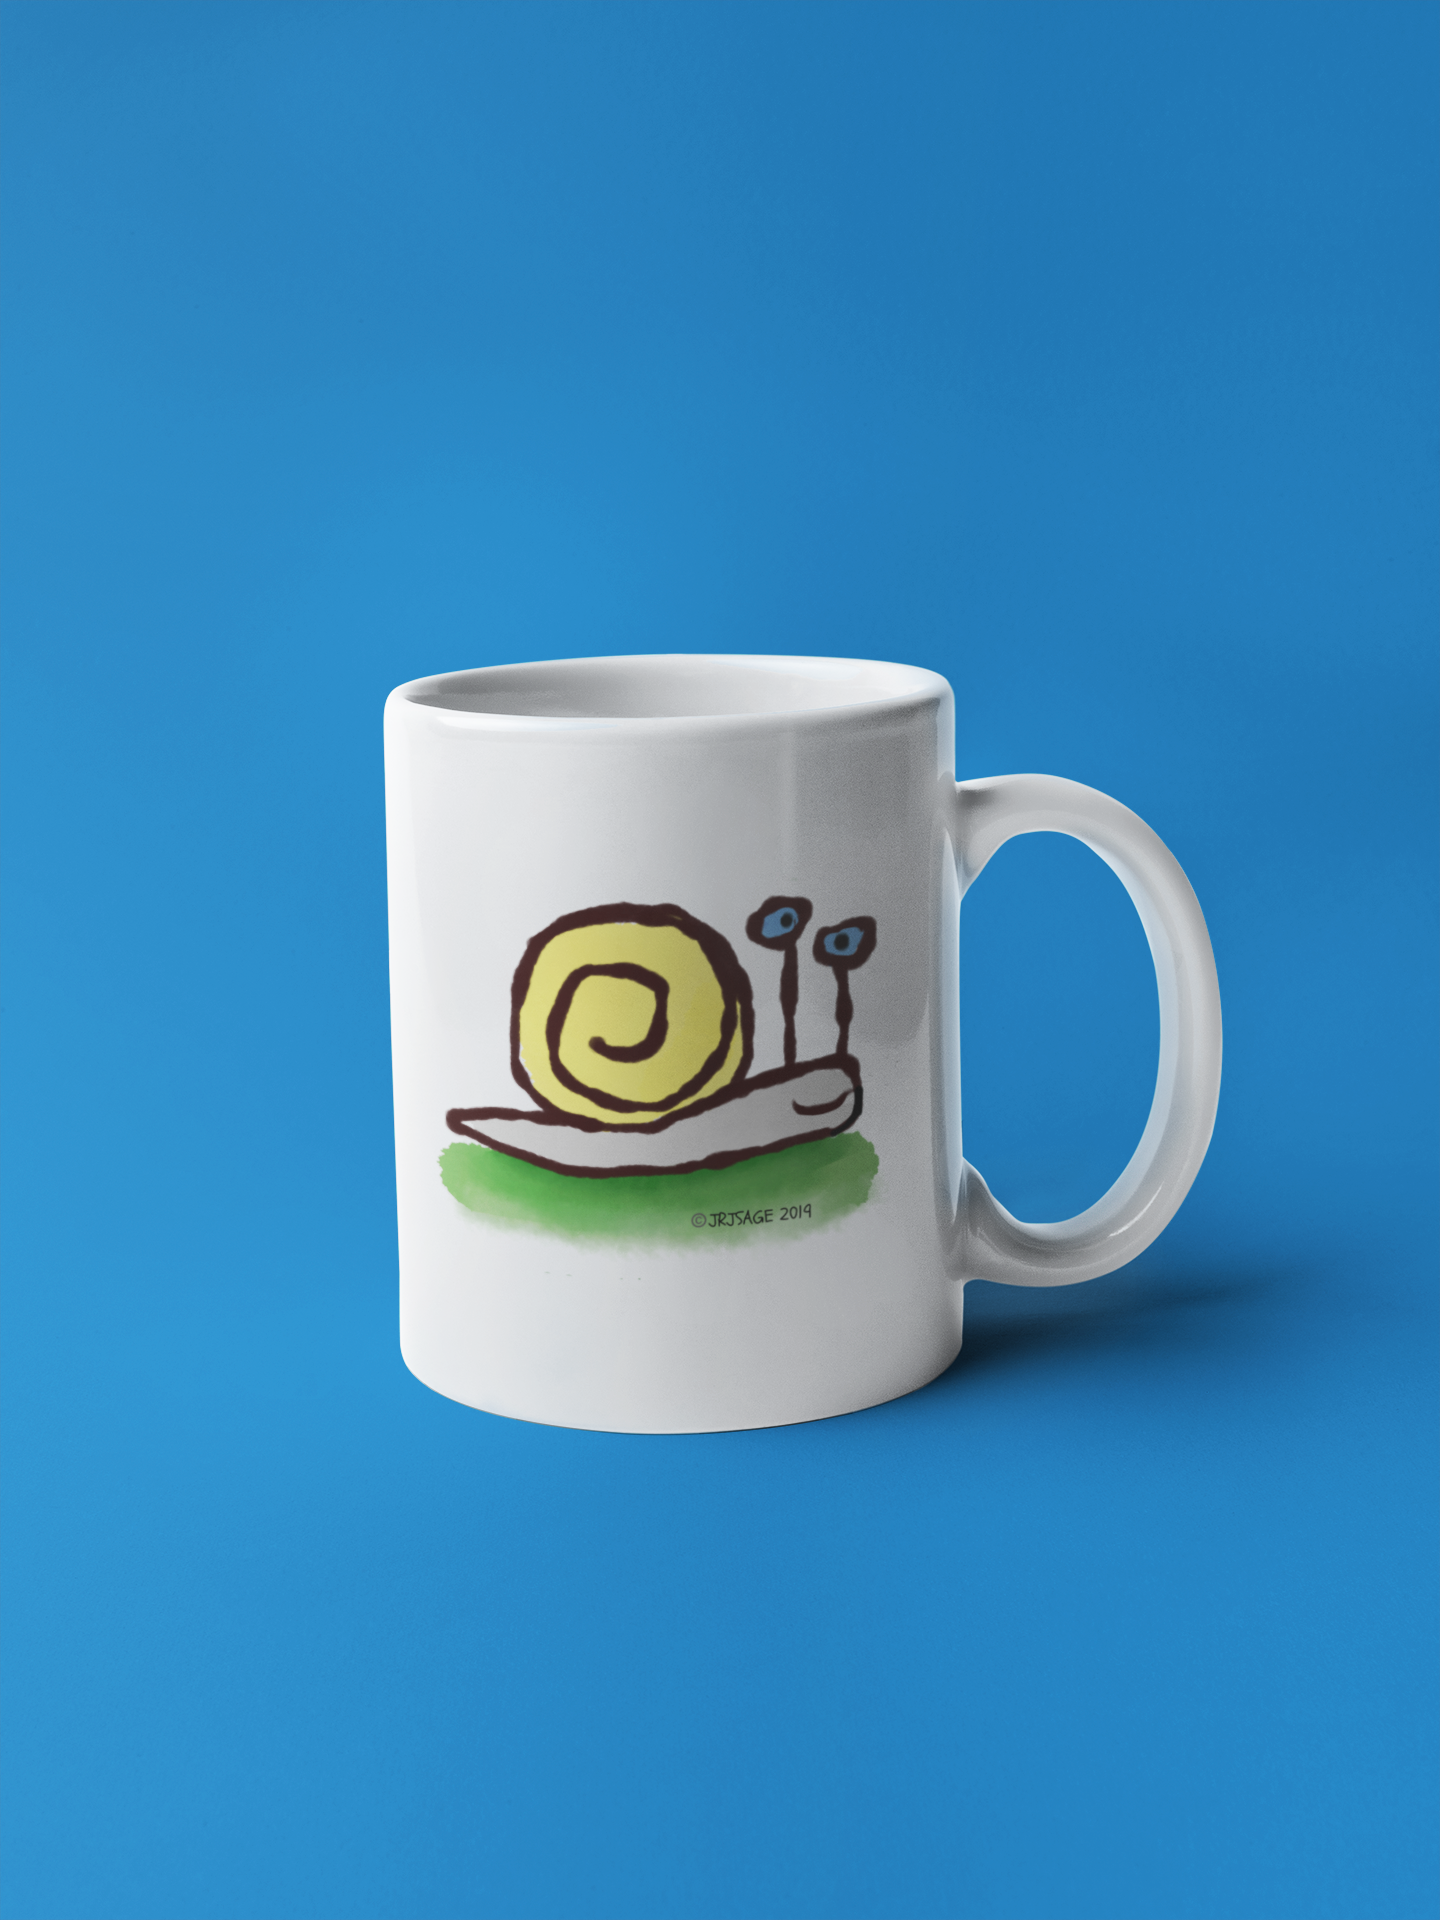 Sly the Snail mug - Cute illustrated funny snail coffee mug designed by Hector and Bone